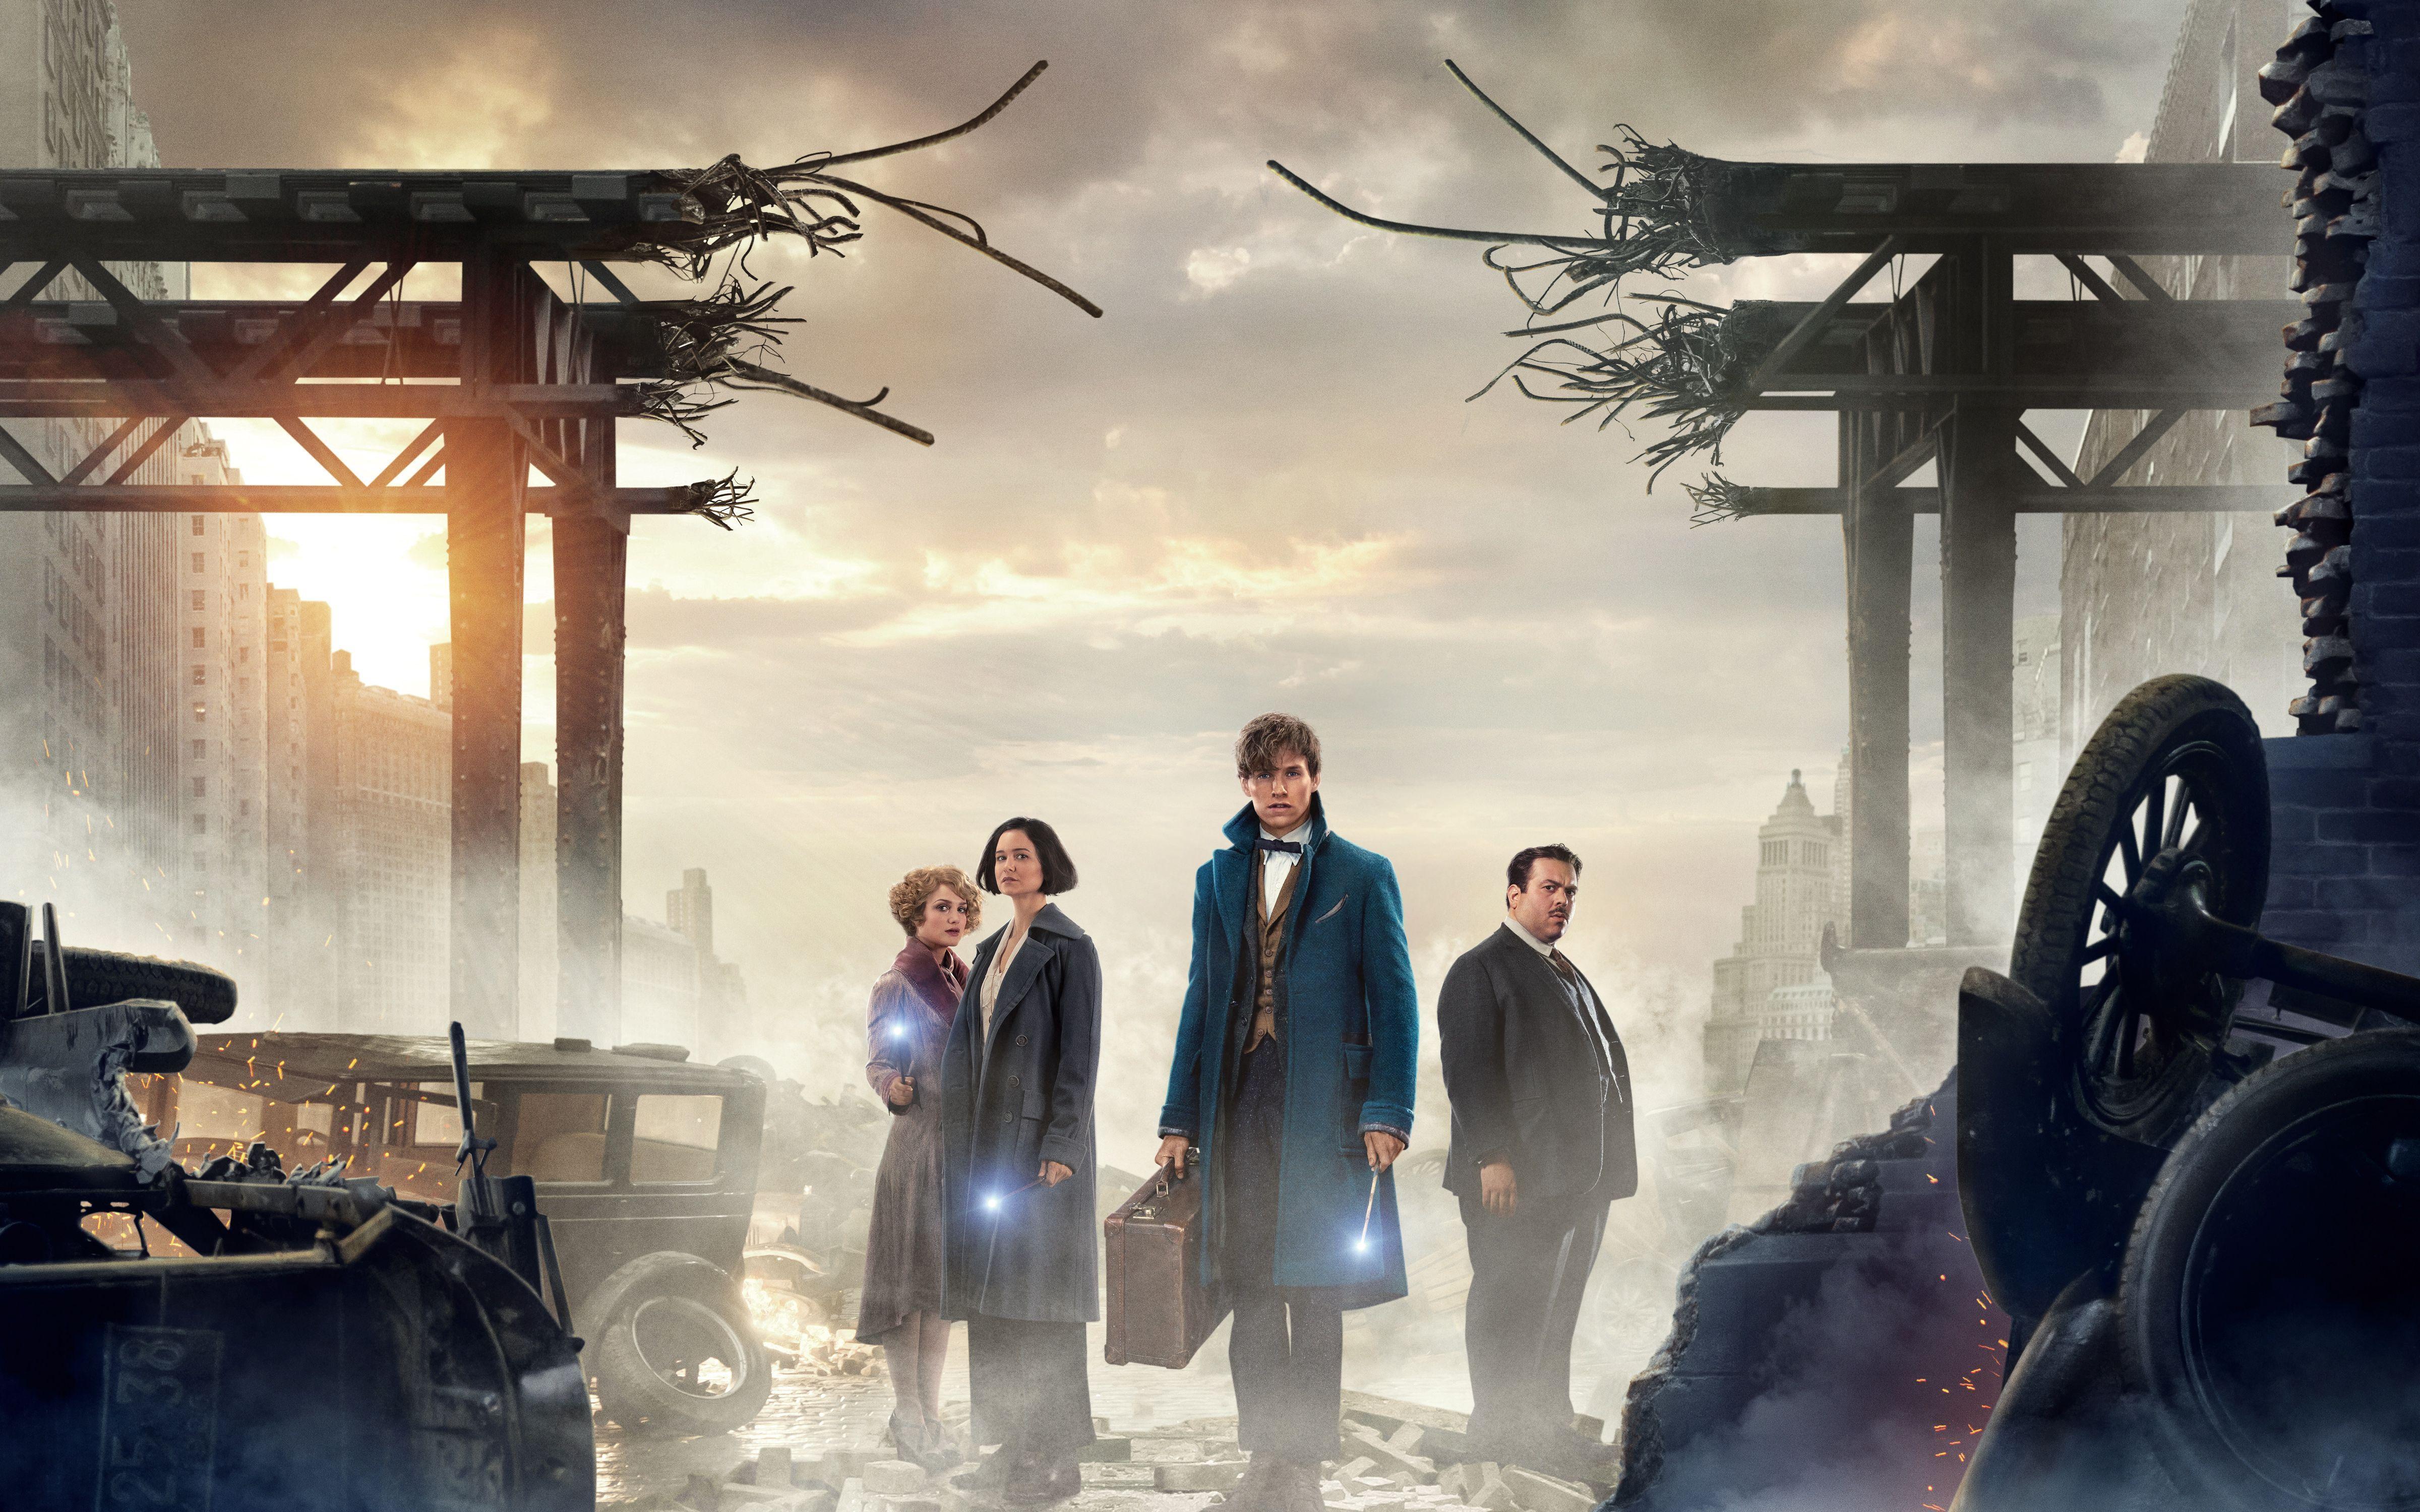 Fantastic Beasts and Where to Find Them 4K 2016 Wallpaper. HD